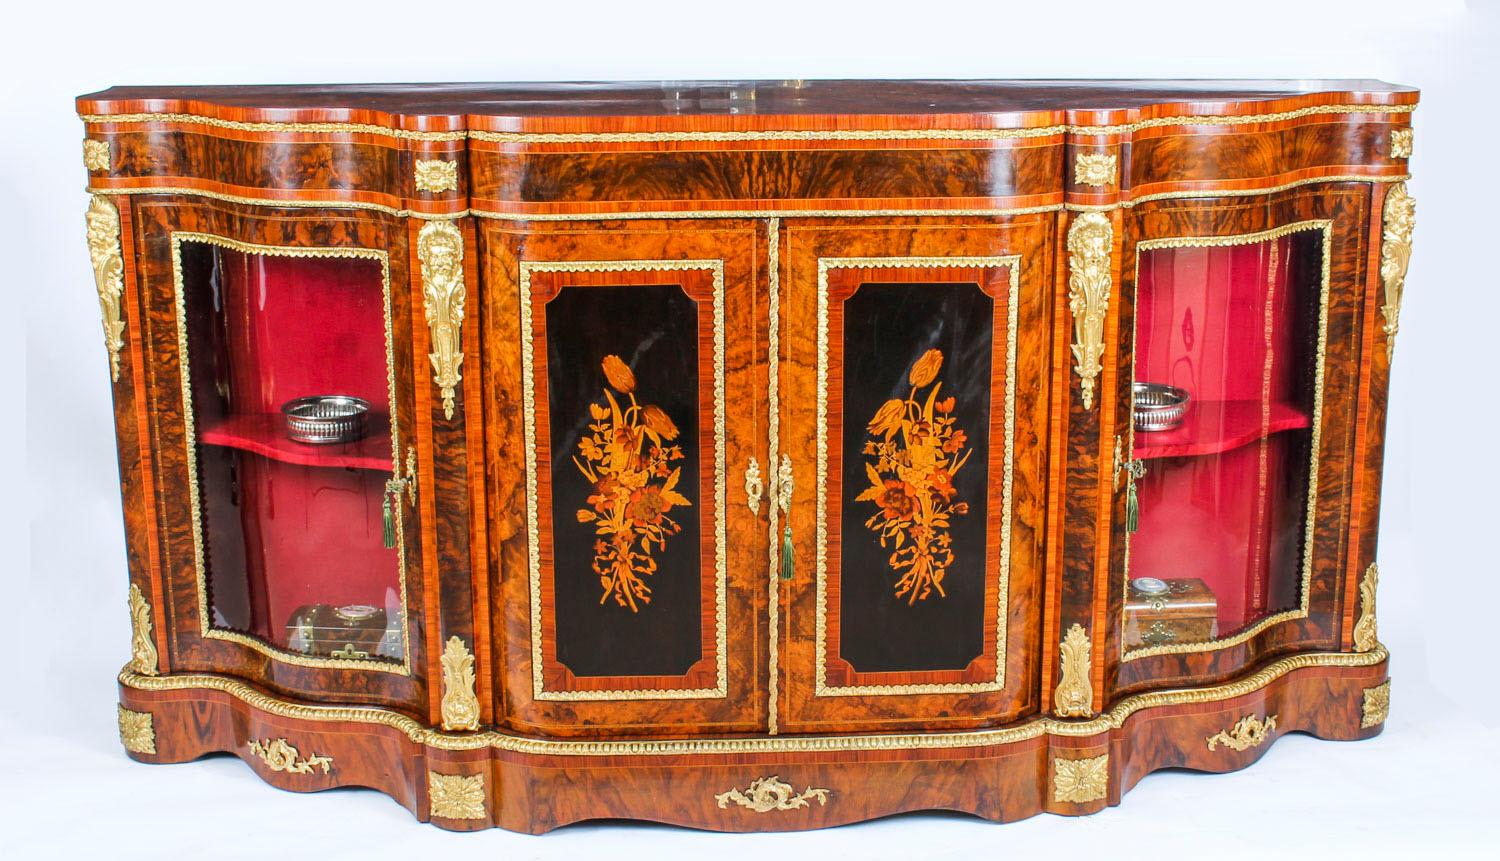 This is a superb antique Victorian ormolu mounted burr walnut and floral marquetry inlaid credenza, circa 1860 in date.

Oozing sophistication and charm, this credenza is the absolute epitome of Victorian high society.

The entire piece highlights